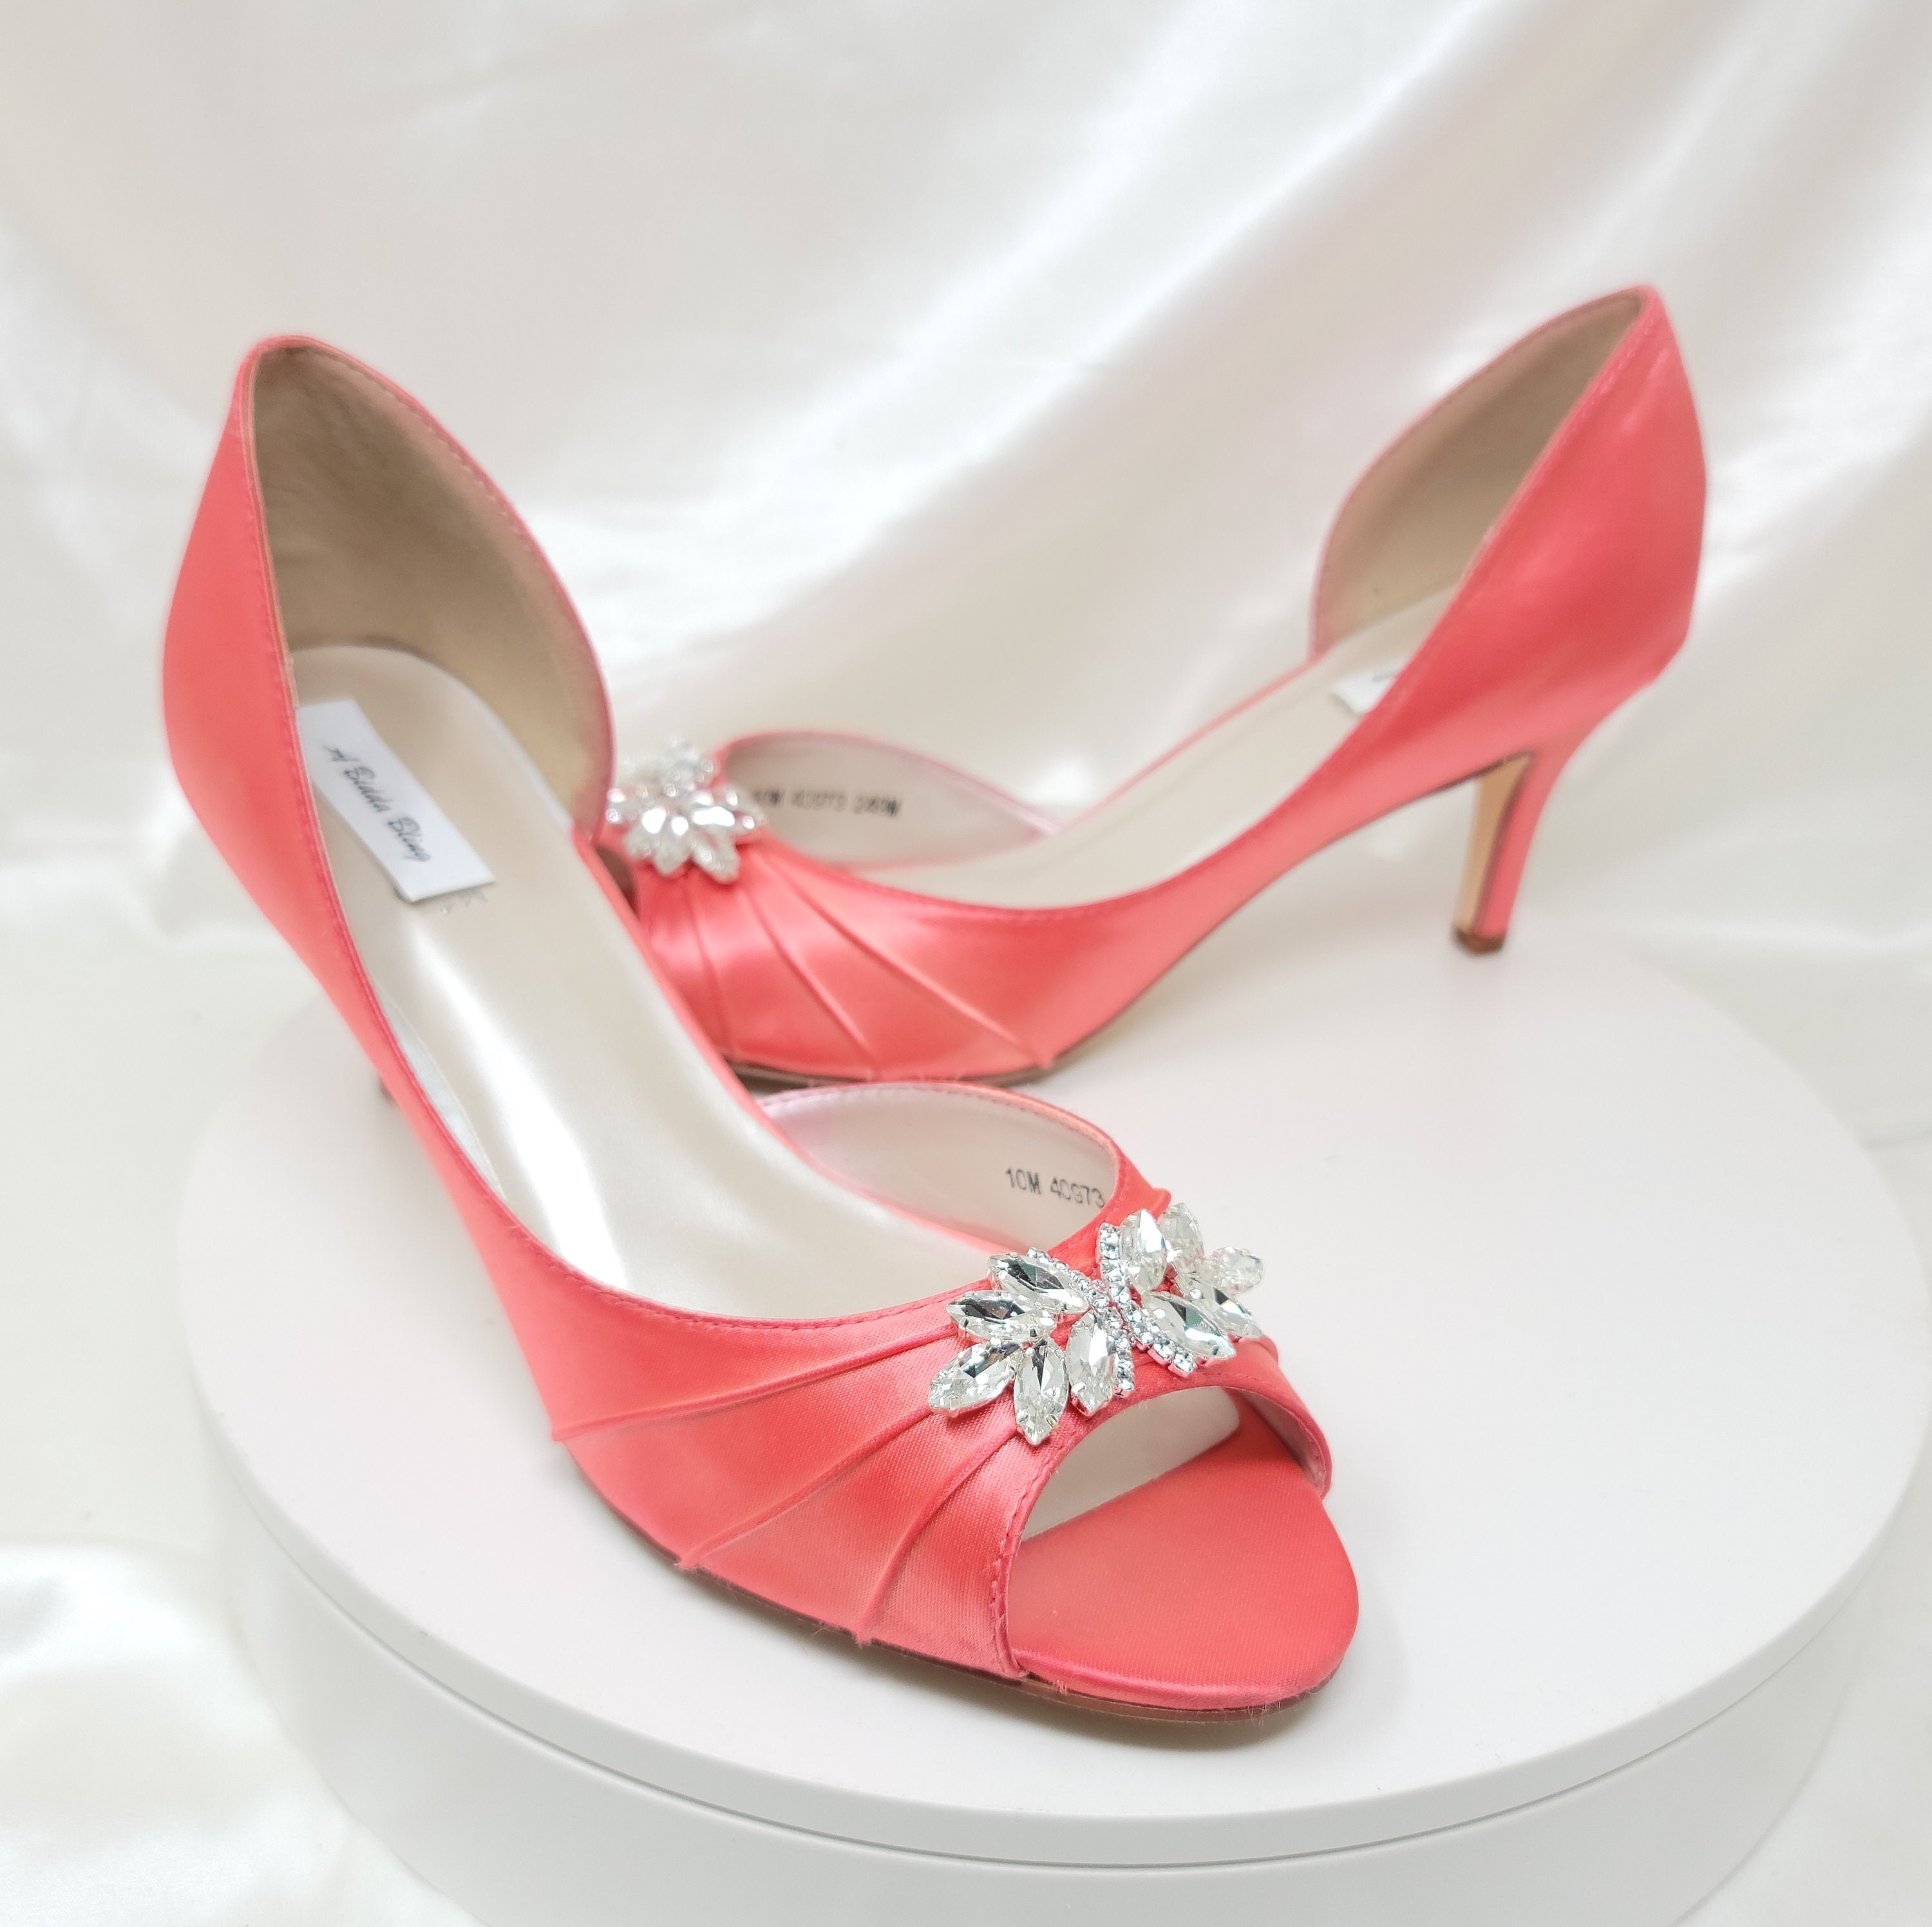 Underwater Coral Platforms Wedding Shoes from Charlie Co Shoes